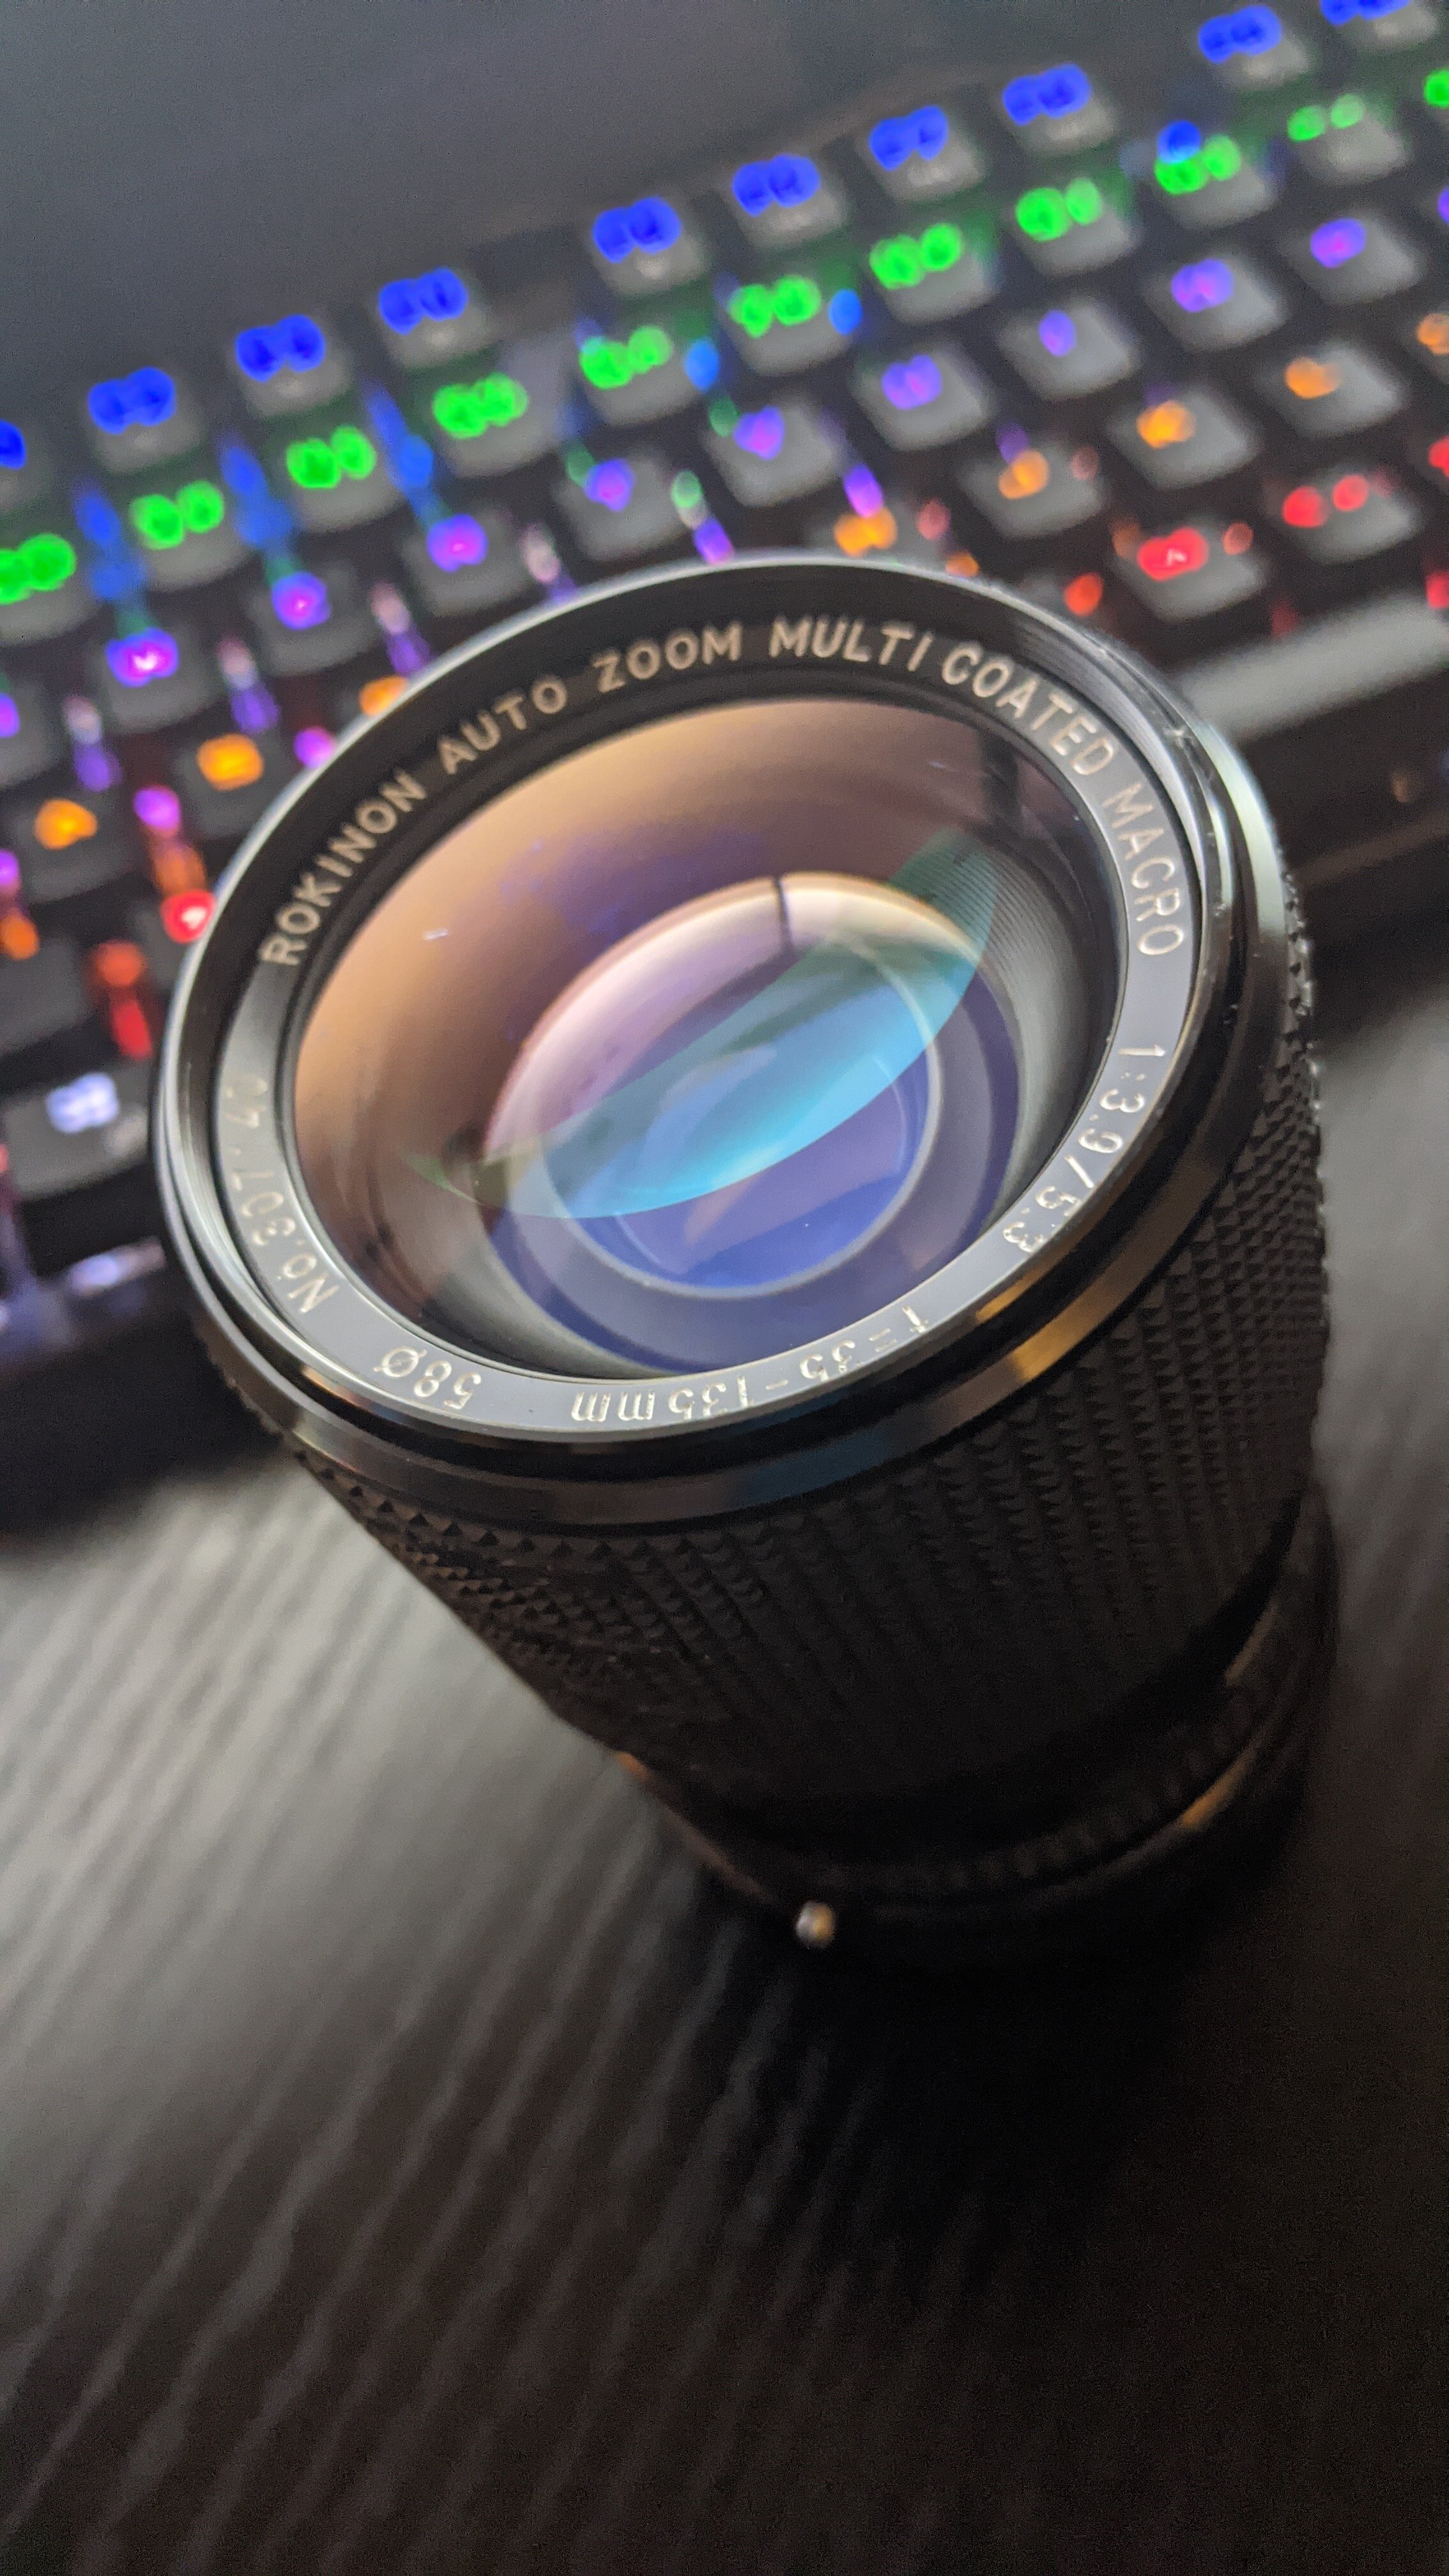 This lens weighs more than my Leica M!